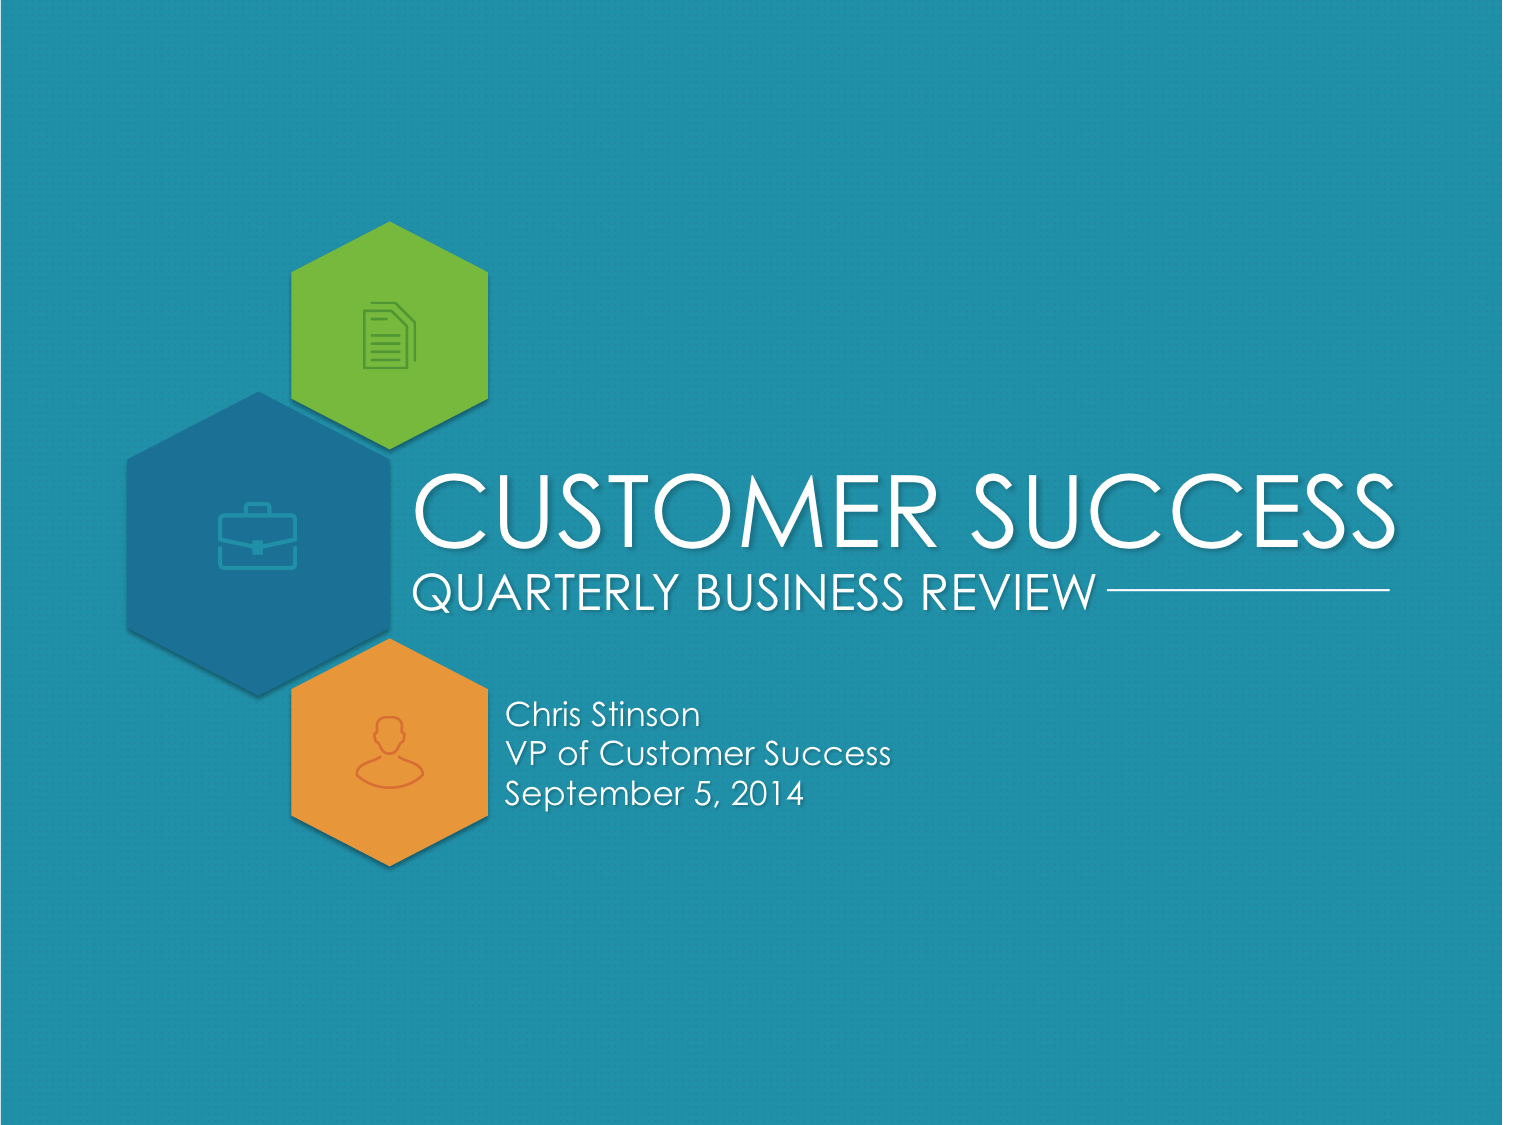 5 Great Resources to Help Your Customer Success Team Fight Churn